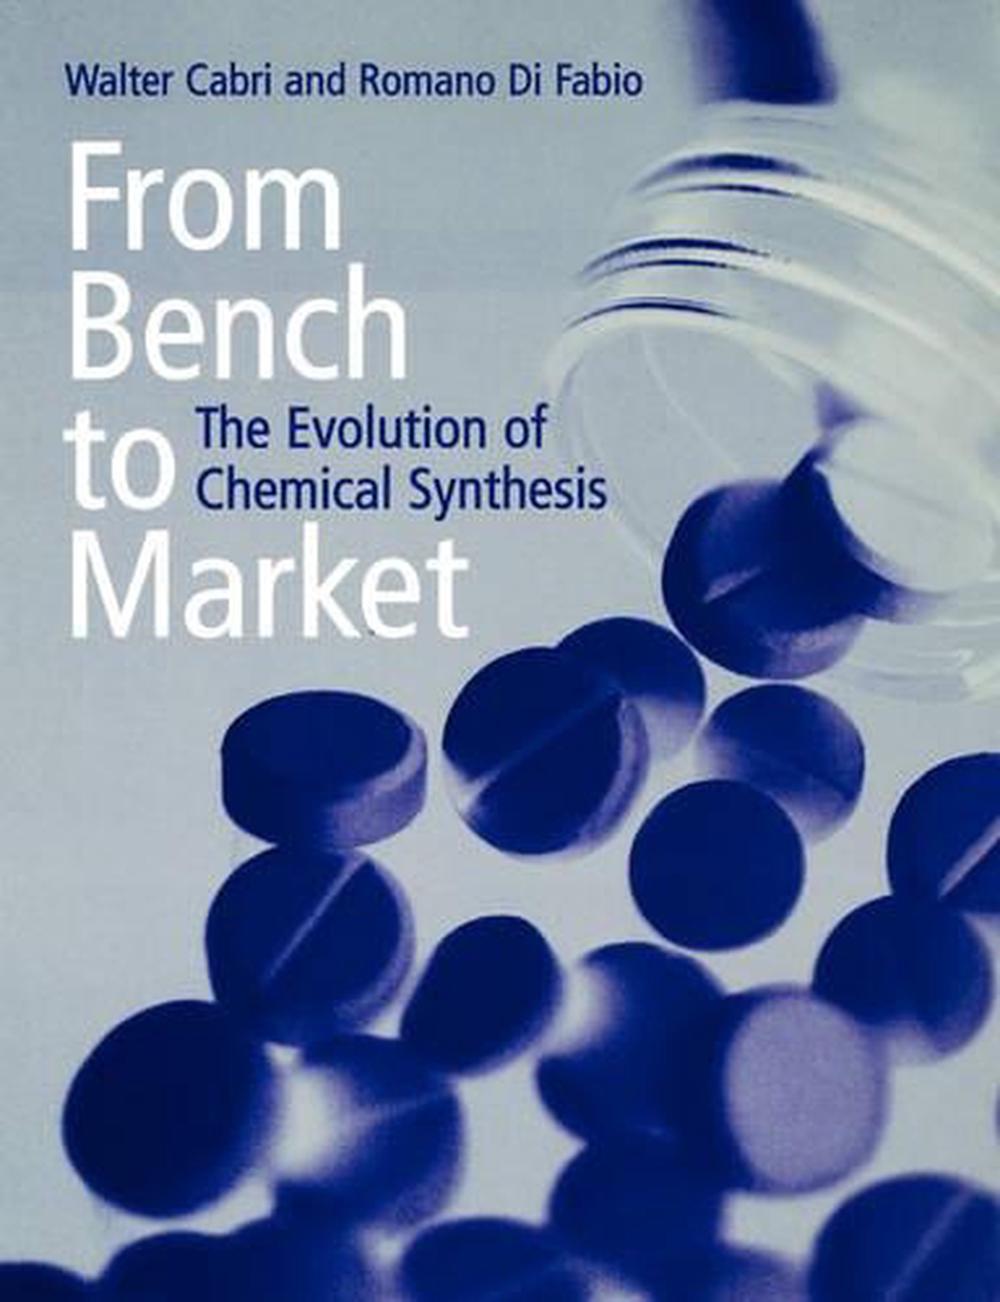 From Bench to Market The Evolution of Chemical Synthesis by Walter